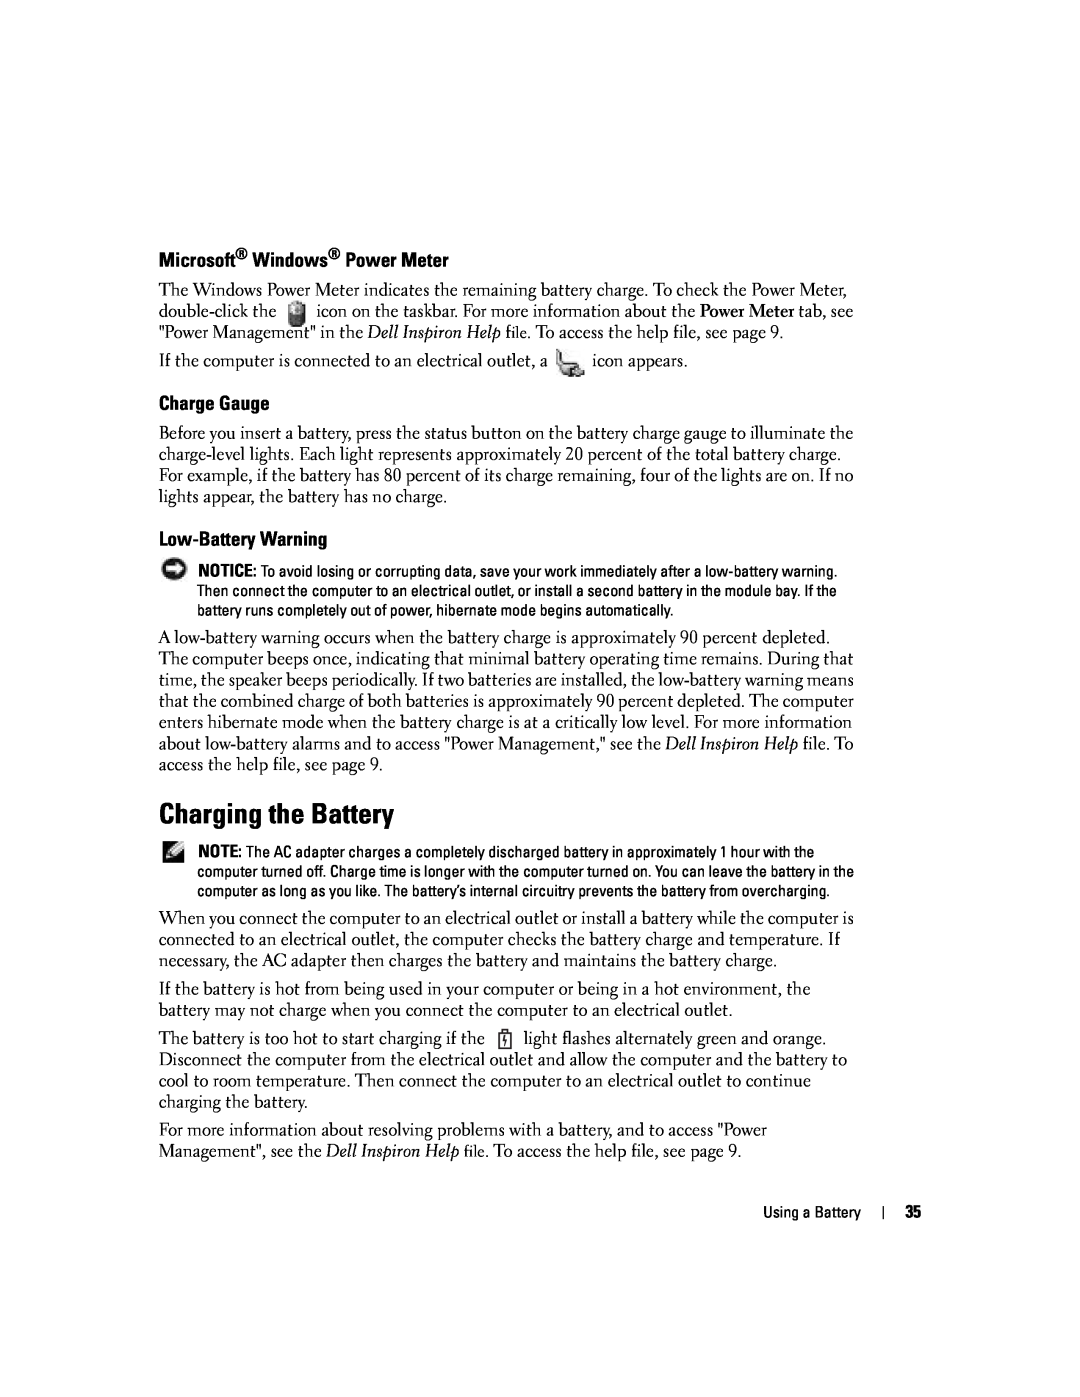 Dell PP10L owner manual Charging the Battery, Microsoft Windows Power Meter, Charge Gauge, Low-Battery Warning 